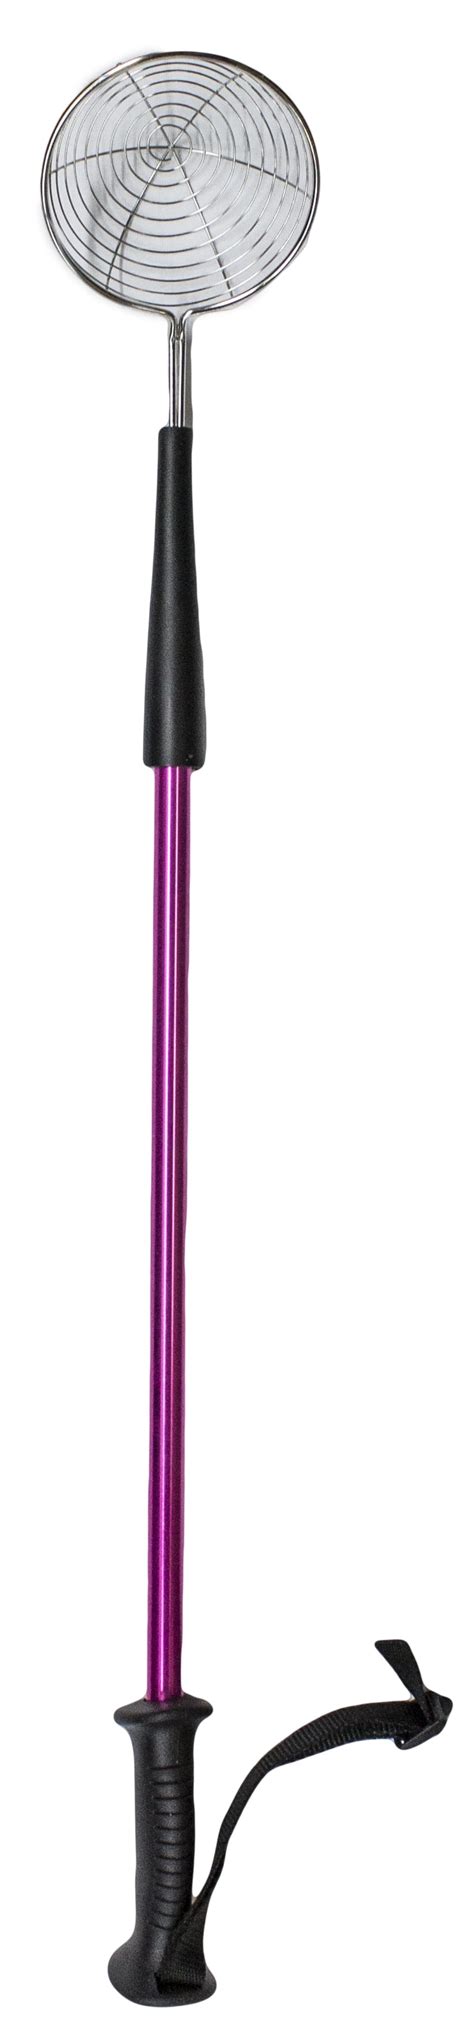 The Sand Scooper Beach Sand Sifter With 28 Inch Handle Pink